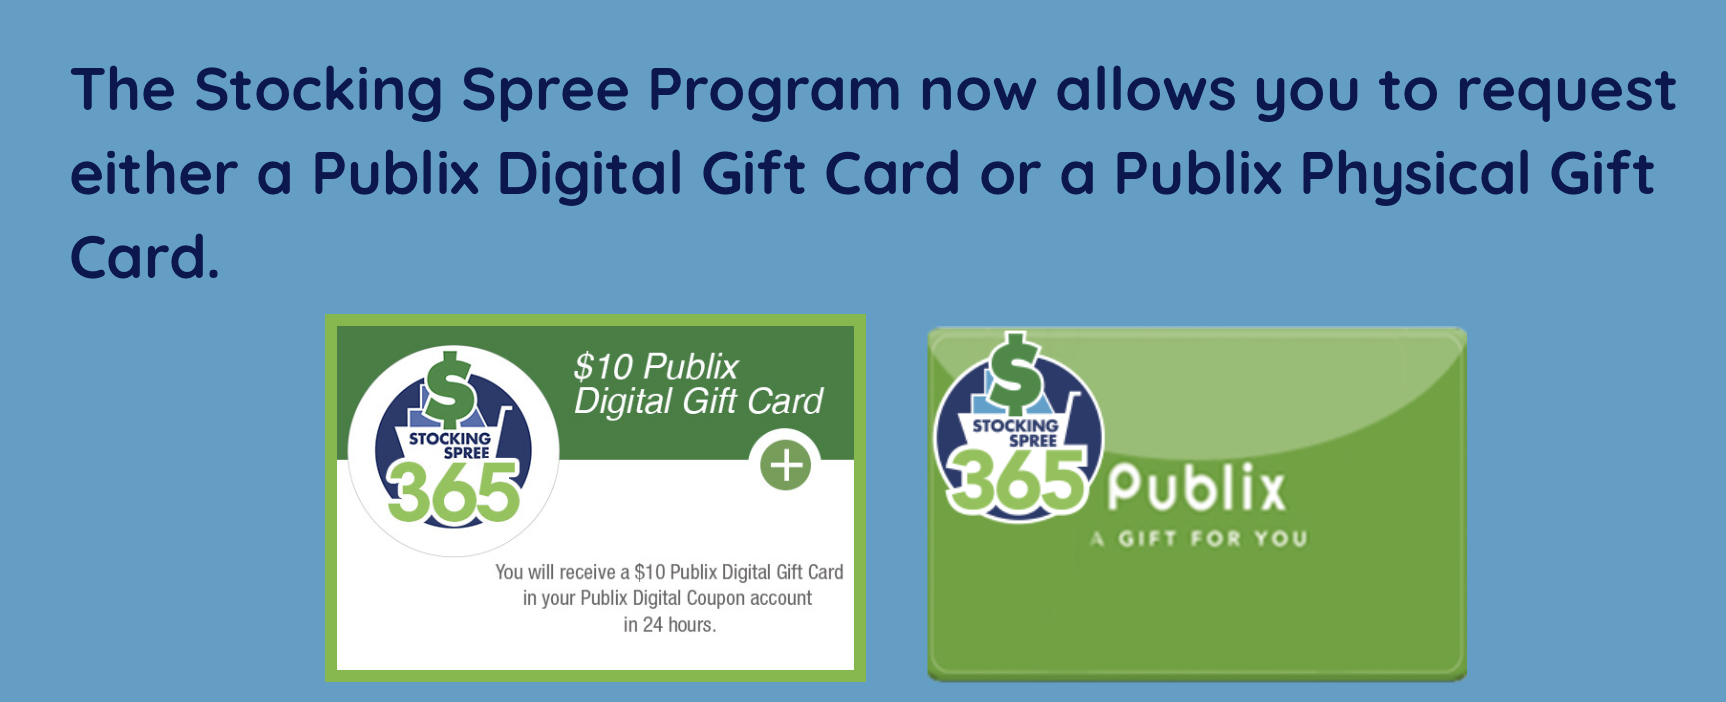 The Stocking Spree 365 Program Is Back For 2022 - Start Earning Up To $120 In Publix Gift Cards on I Heart Publix 3